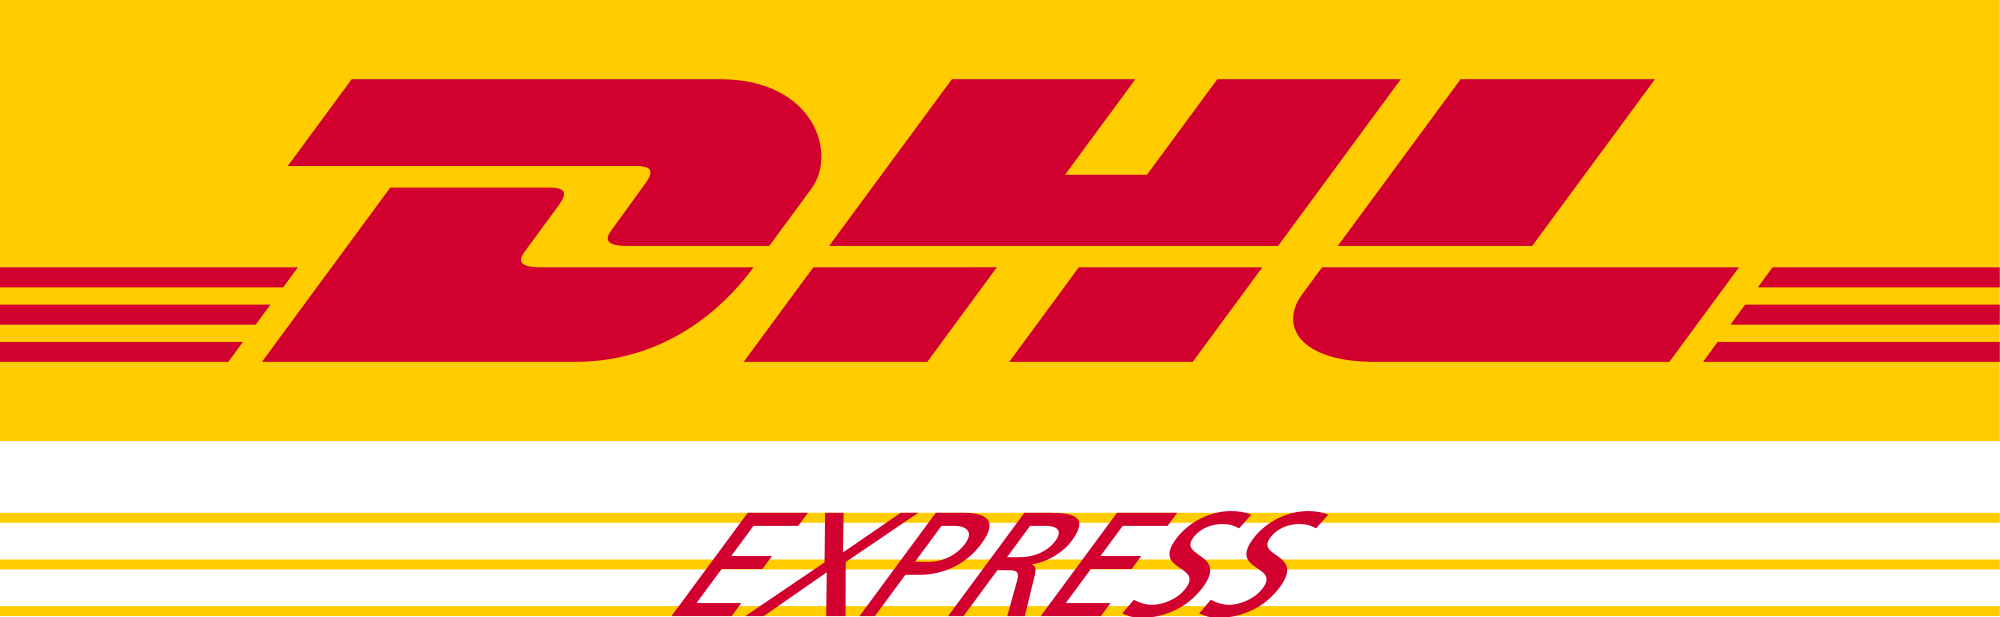 DHL Worldwide Express Logo - DHL Express. eCommerce Show North